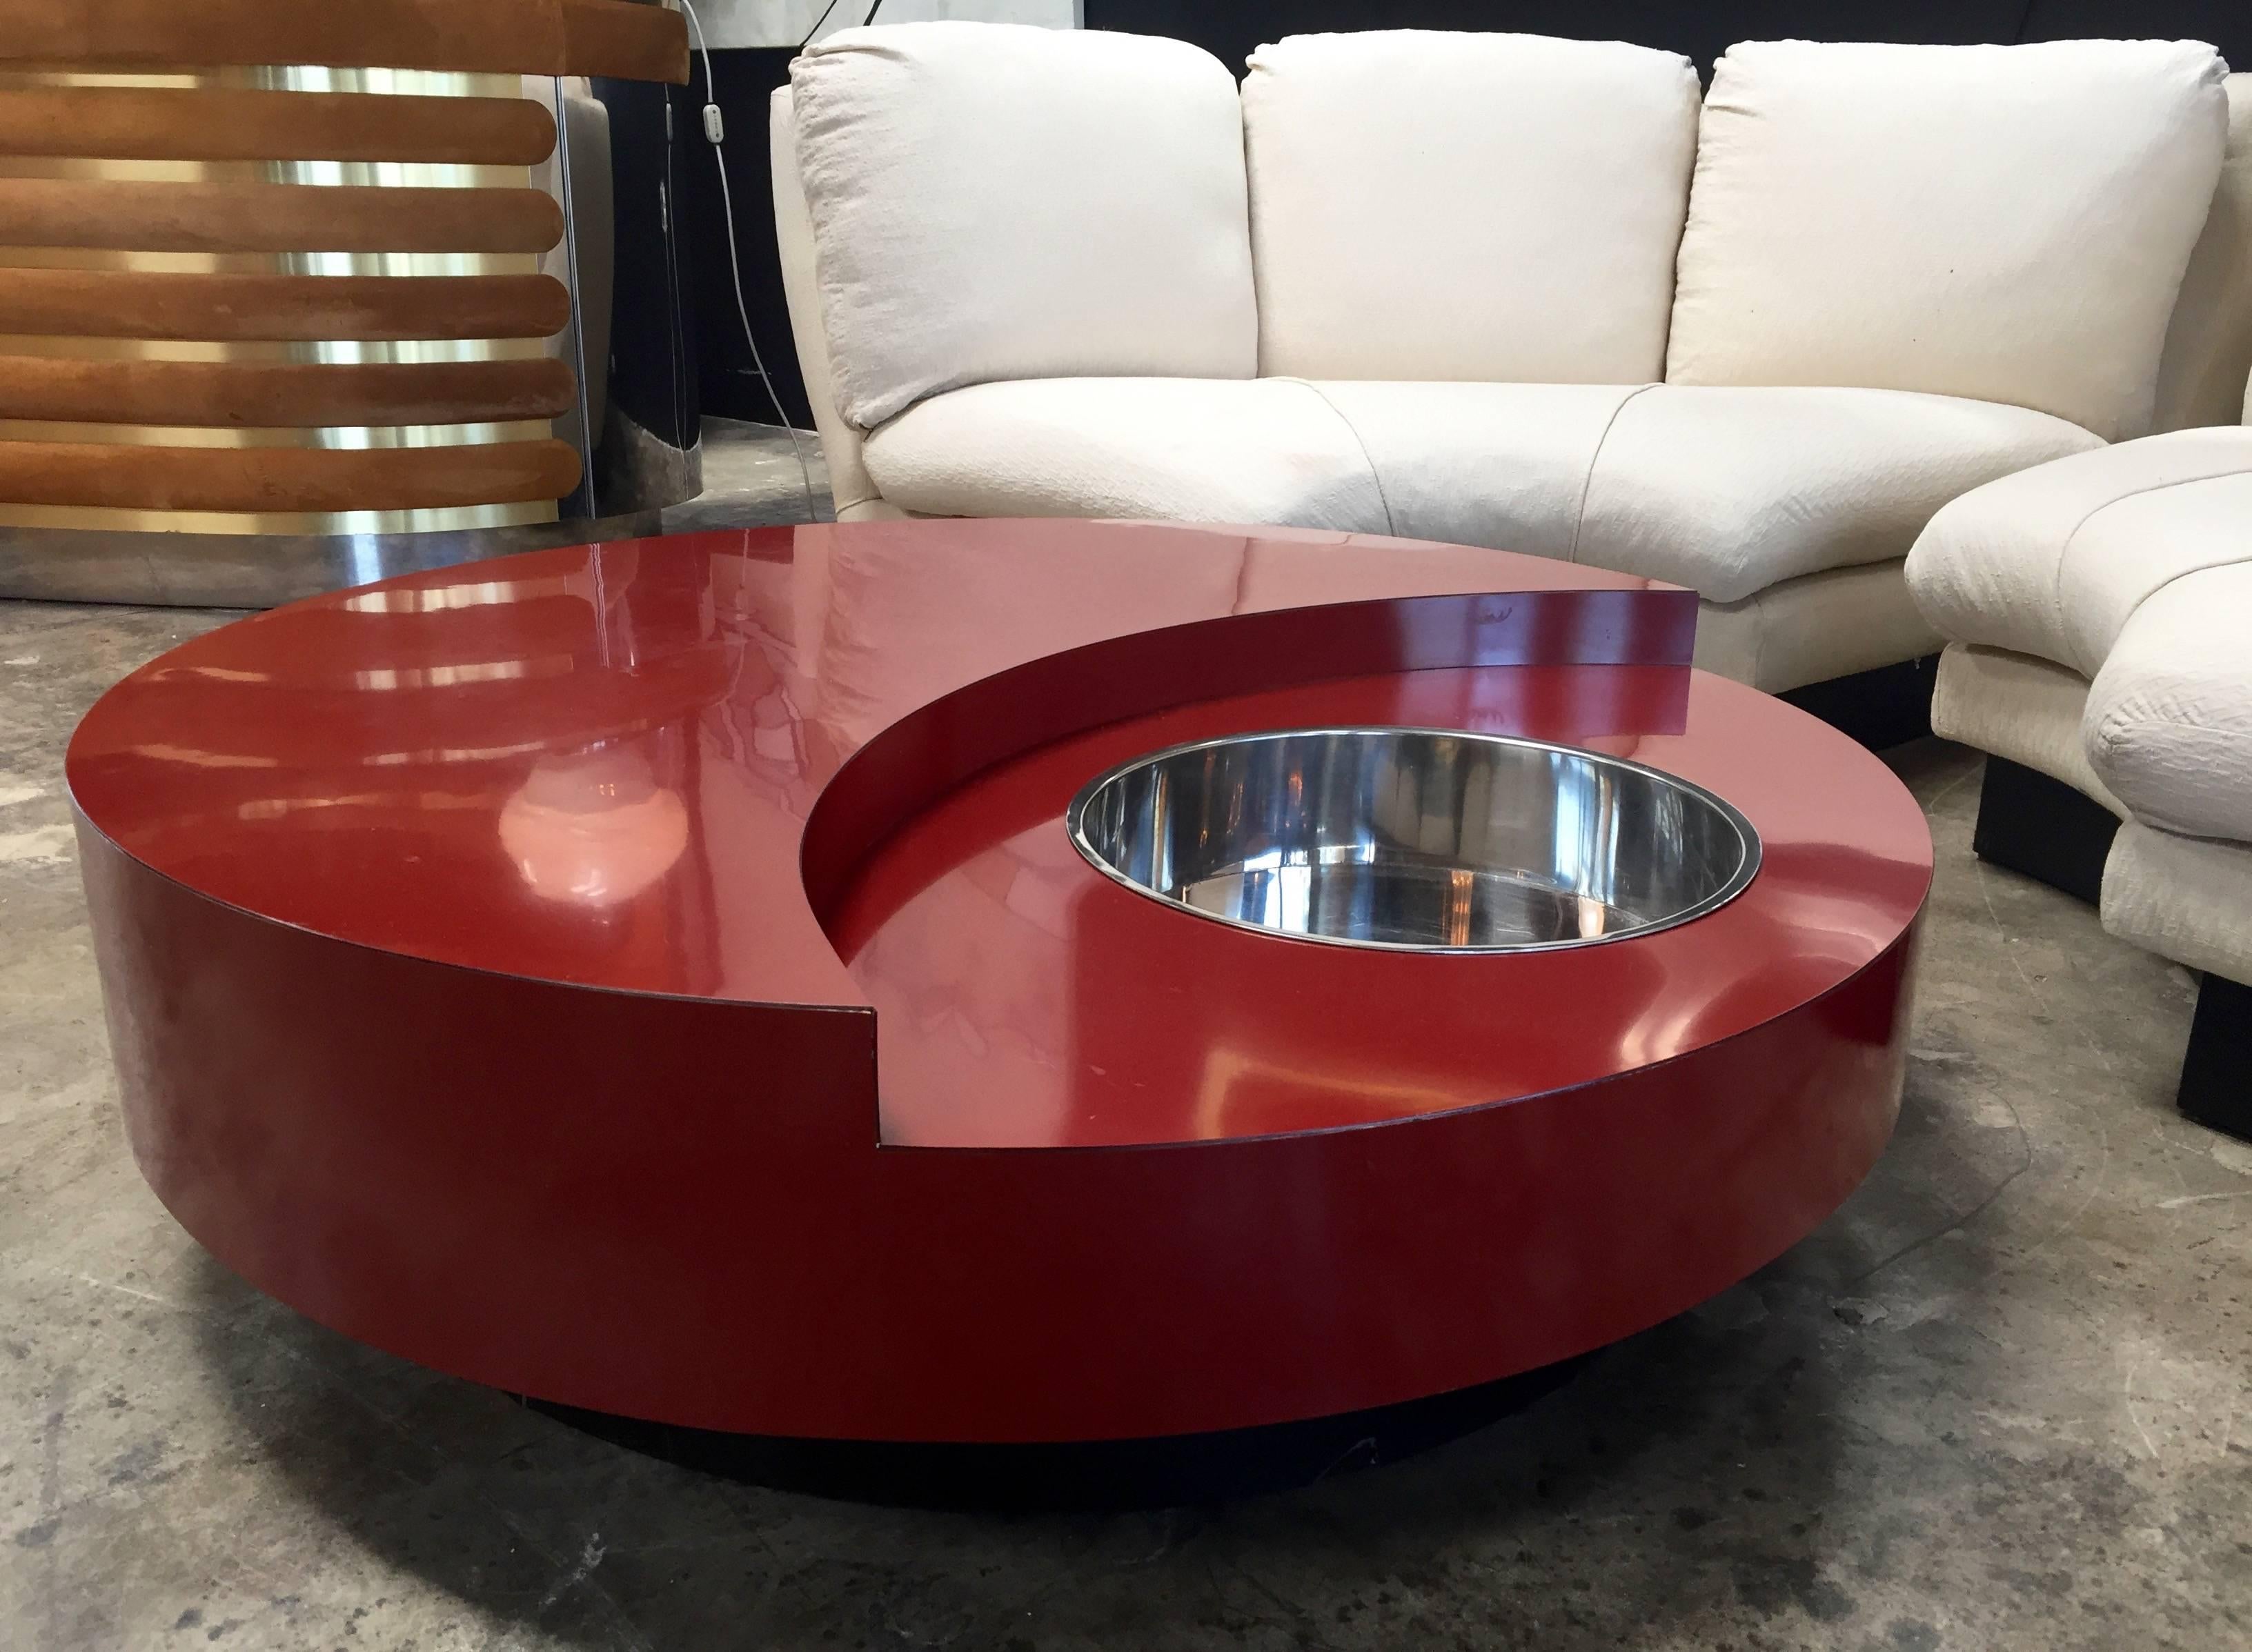 Iconic round red coffee table by Willy Rizzo, Italy, 1970s lacquered red with the box in chrome steel.